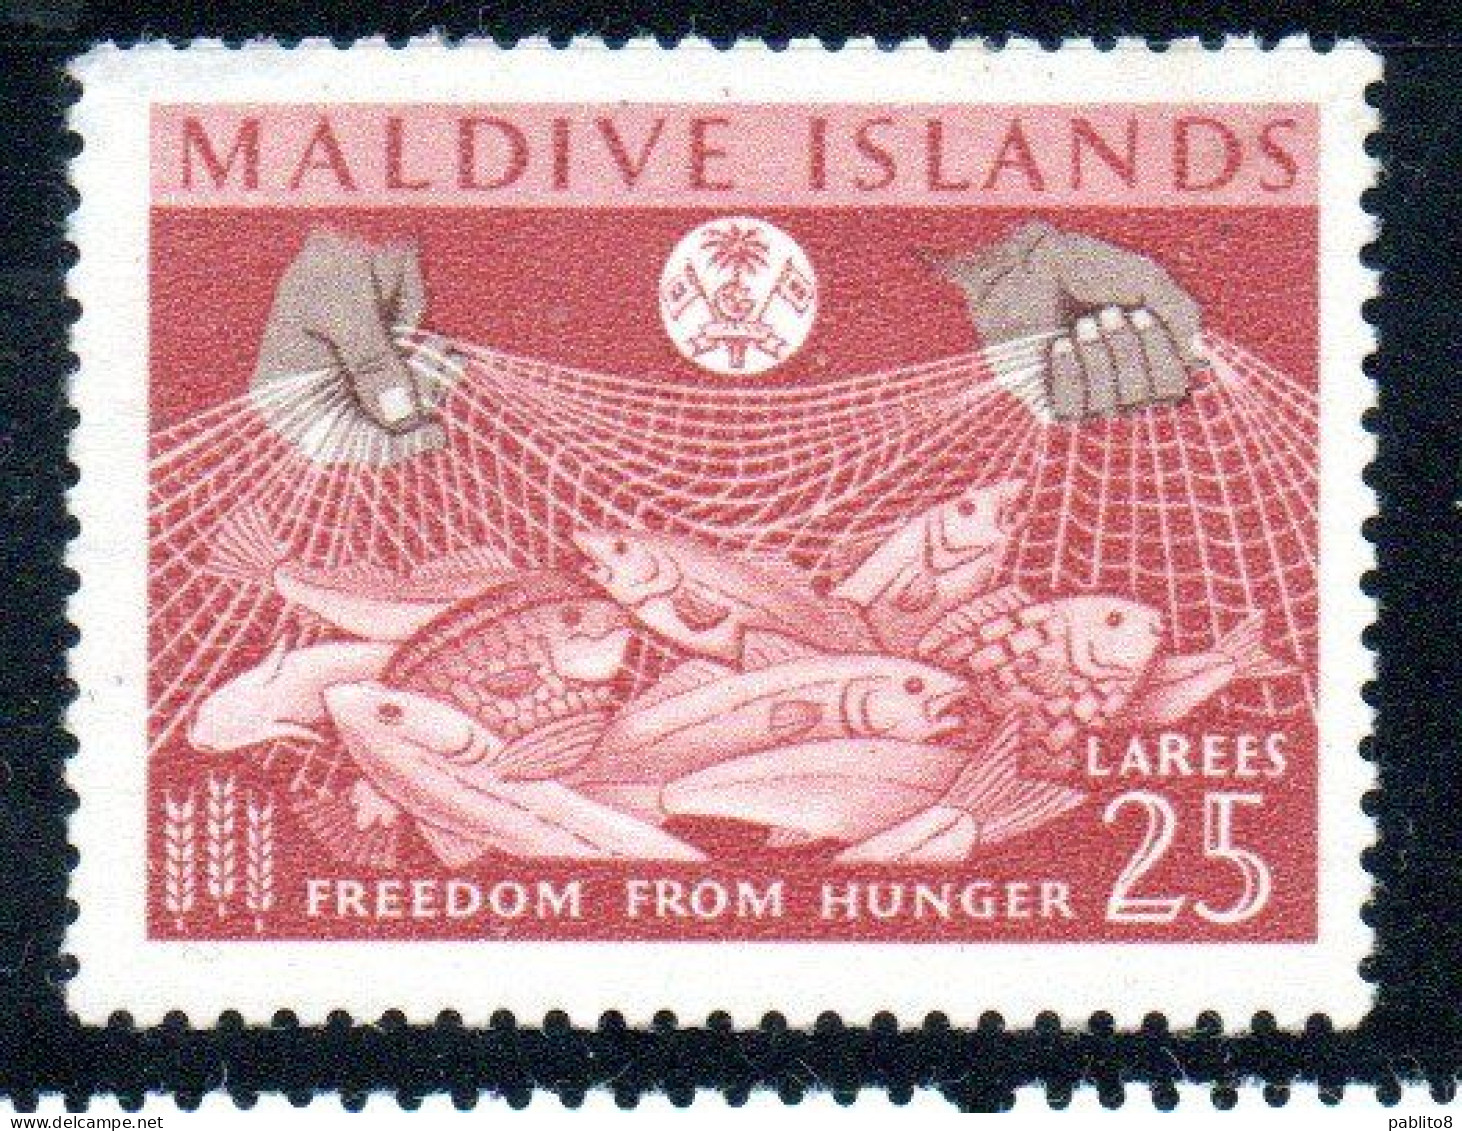 MALDIVES ISLANDS ISOLE MALDIVE BRITISH PROTECTORATED 1963 FAO FREEDOM FROM HUNGER 25L MLH - Maldives (...-1965)